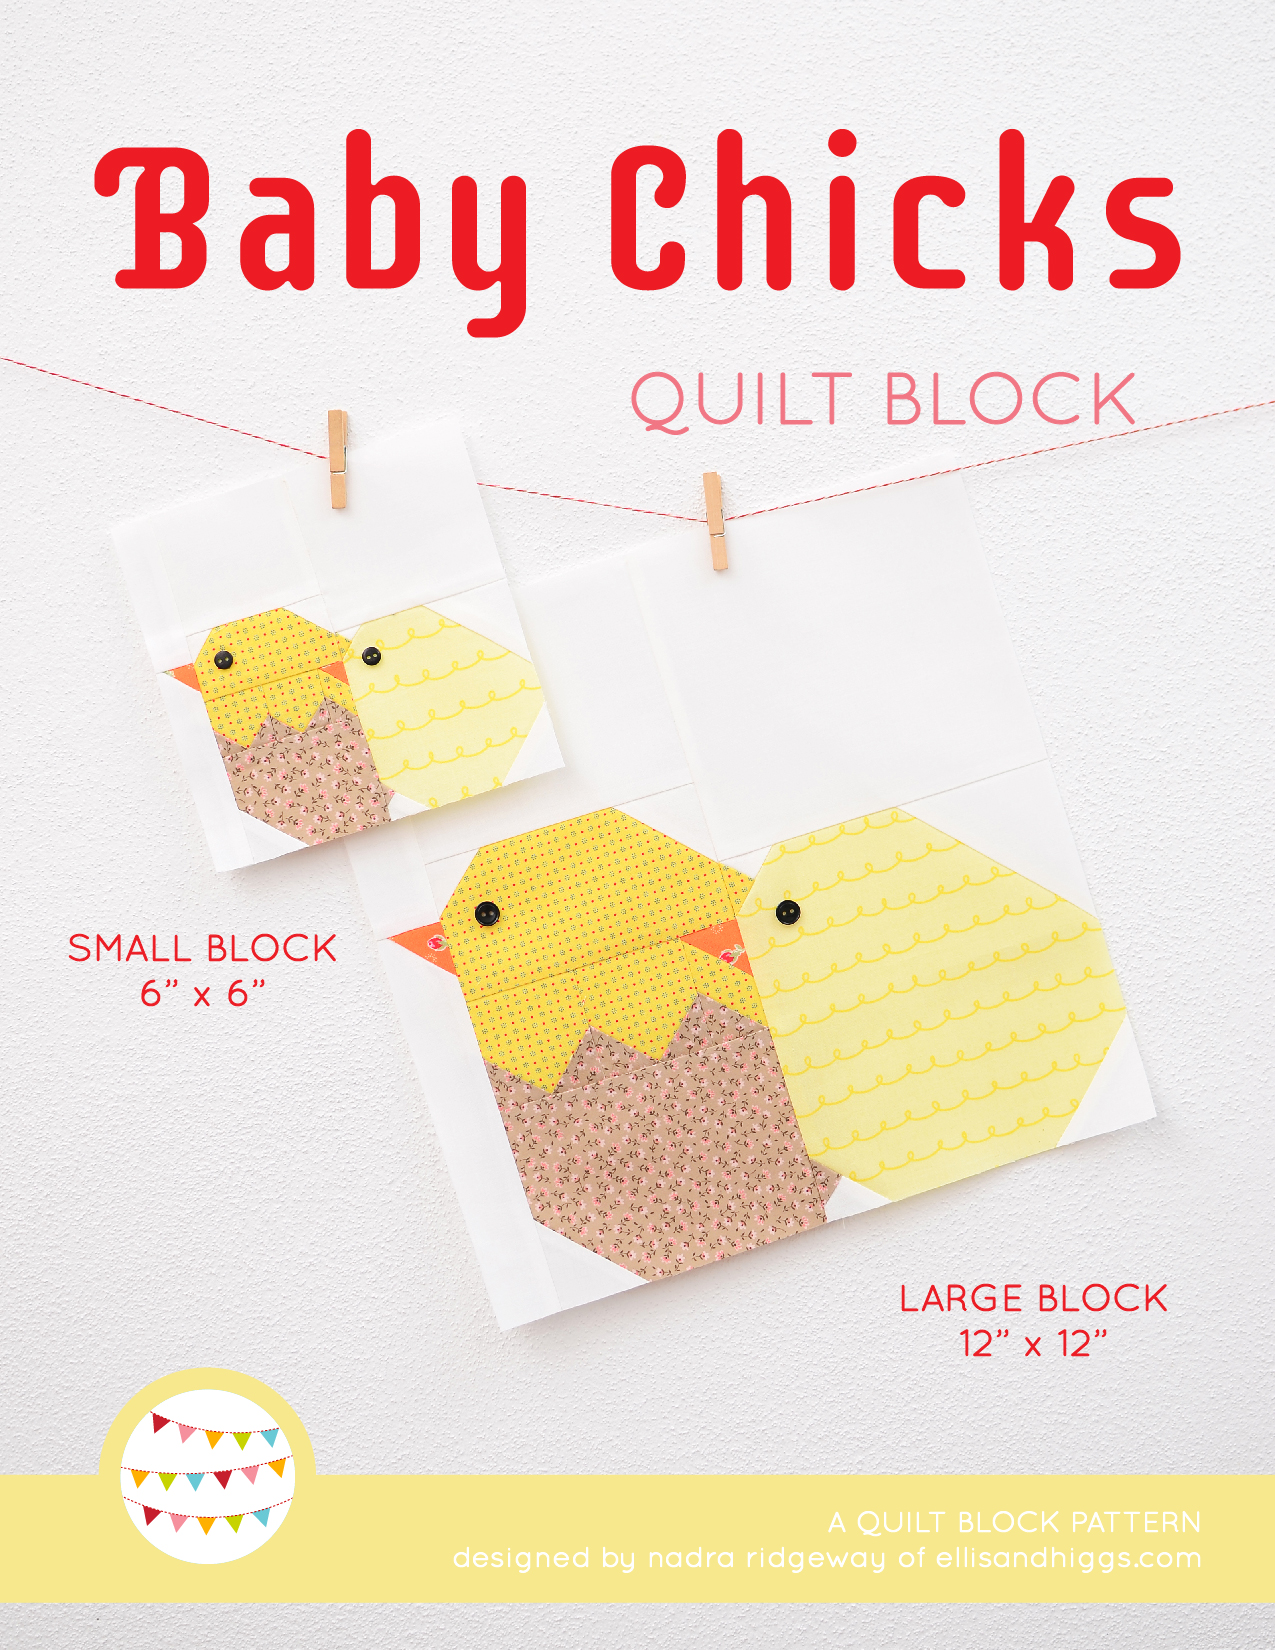 Baby Chicks Quilt Block - Easter Quilt Pattern